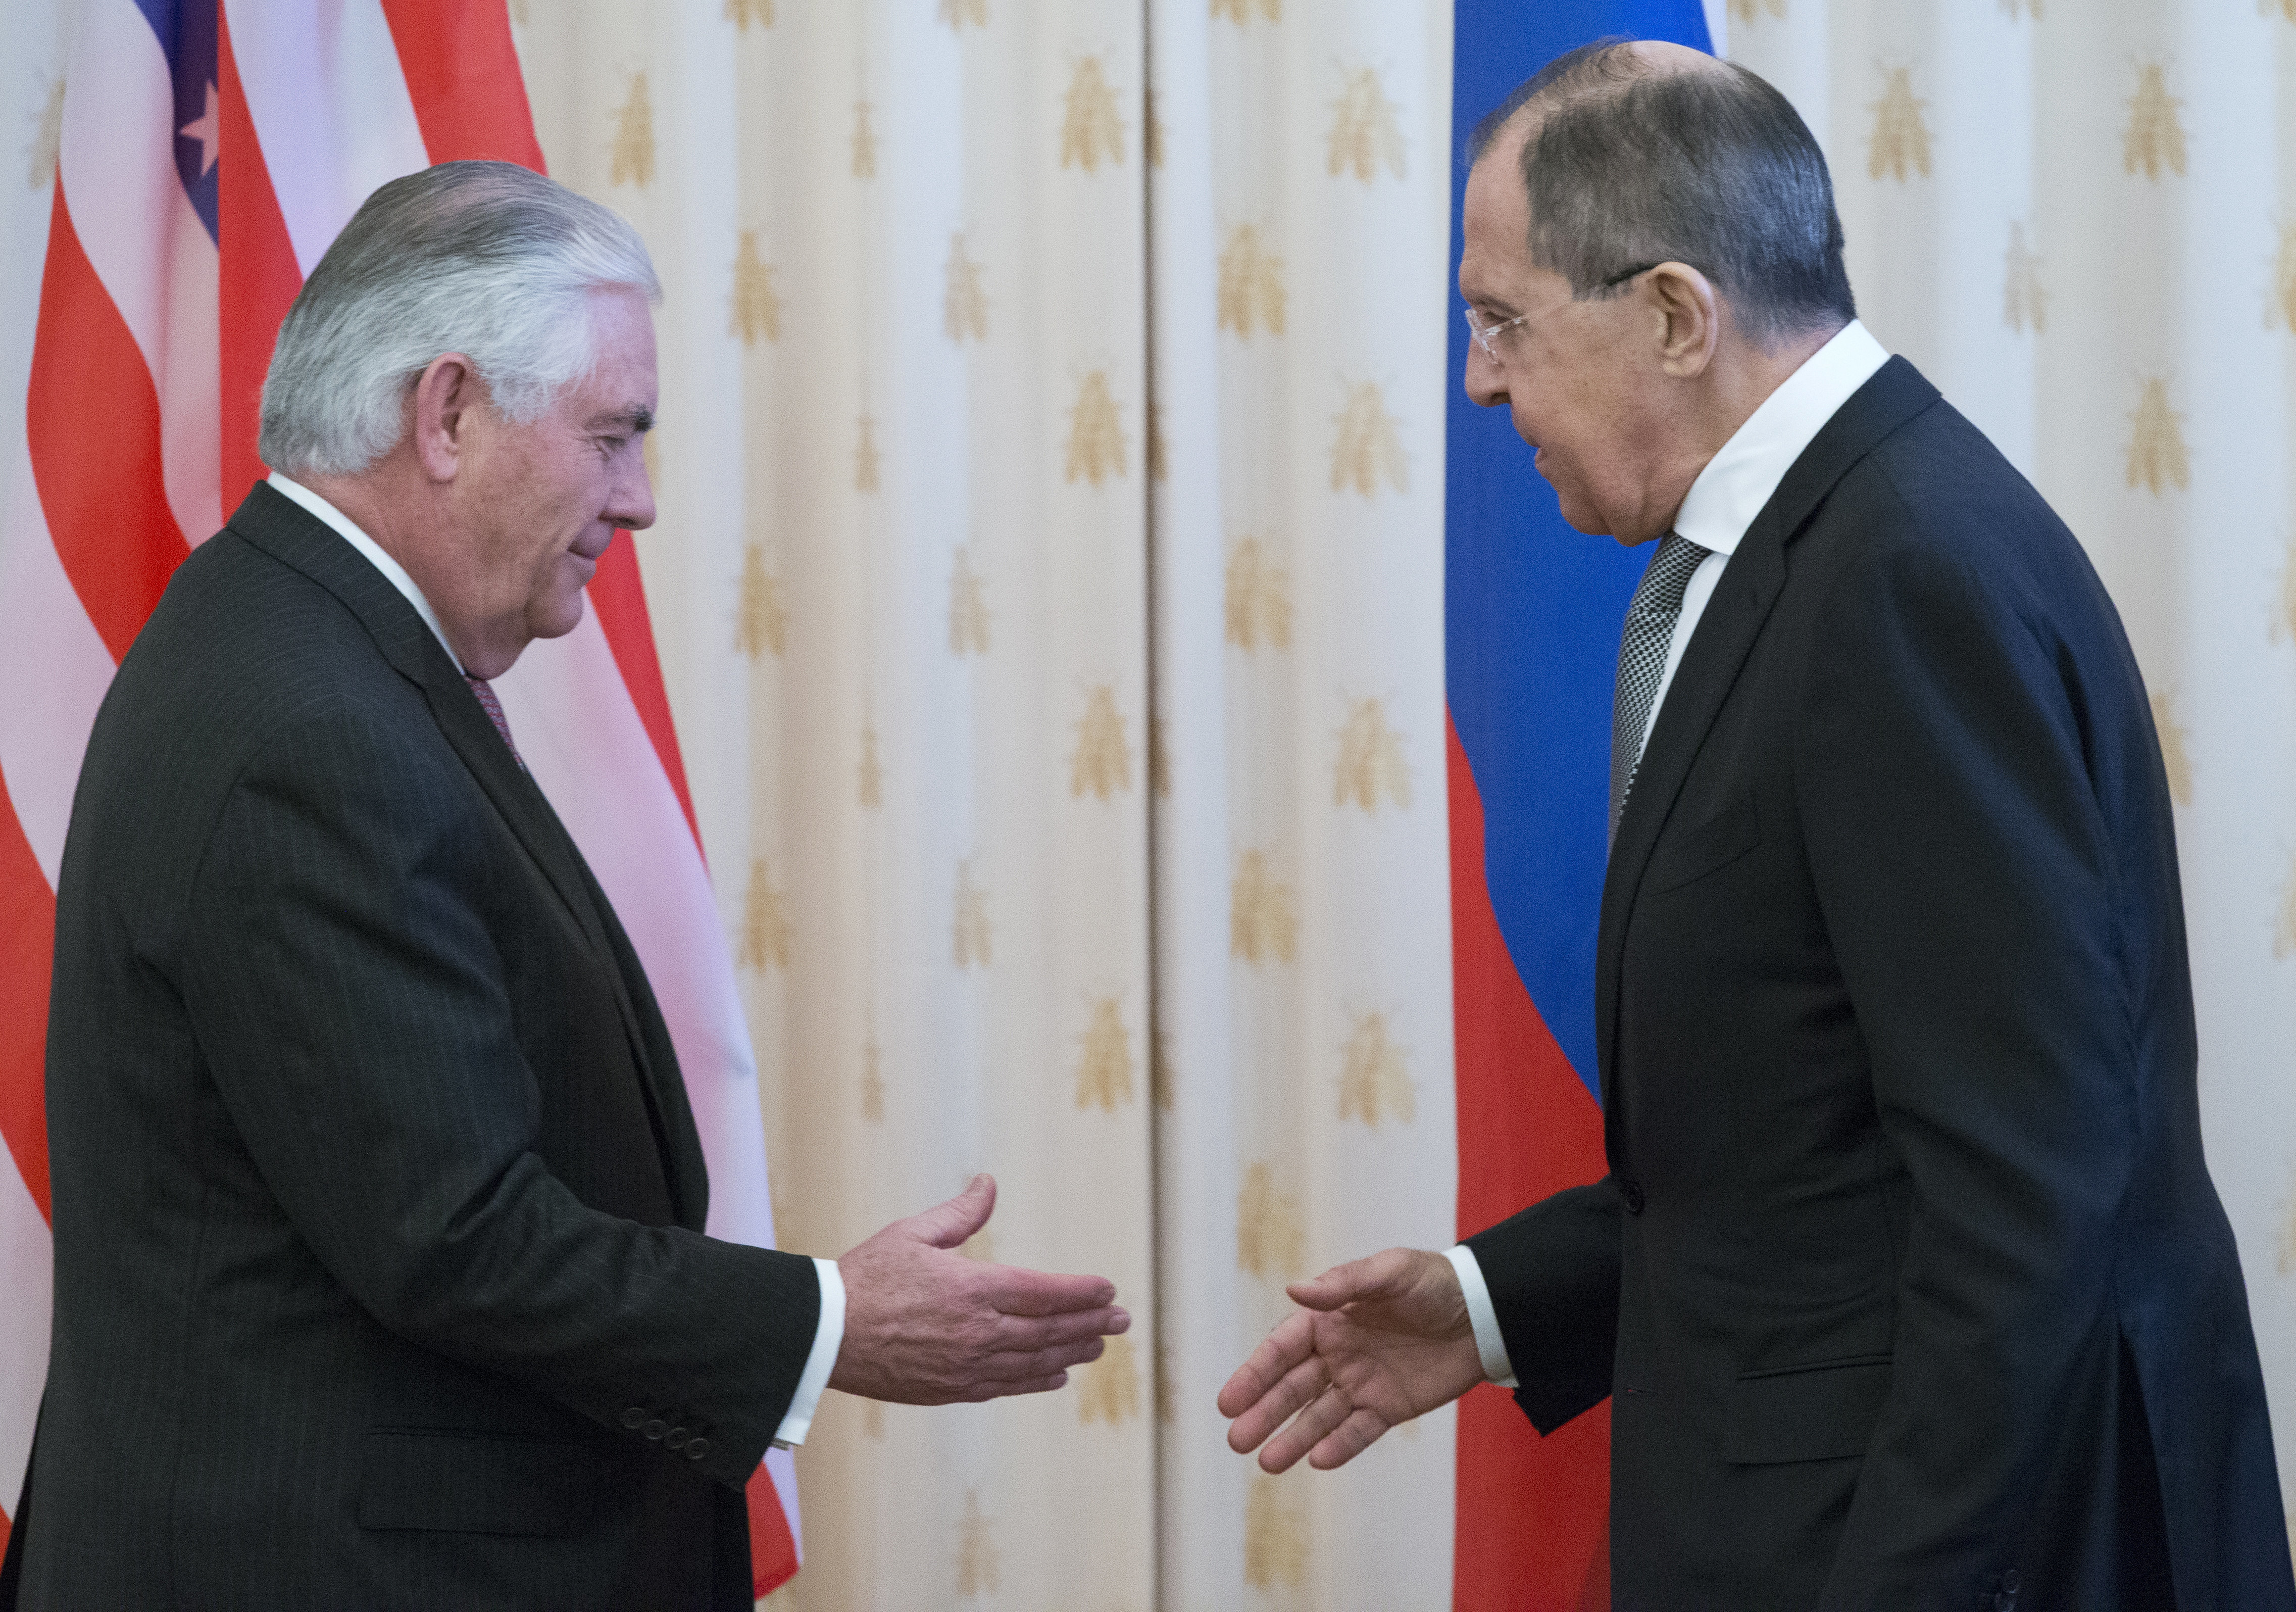 Secretary of State Rex Tillerson, left, and Russian Foreign Minister Sergey Lavrov shake hands prior to their talks in Moscow,  April 12, 2017. (Alexander Zemlianichenko—AP)